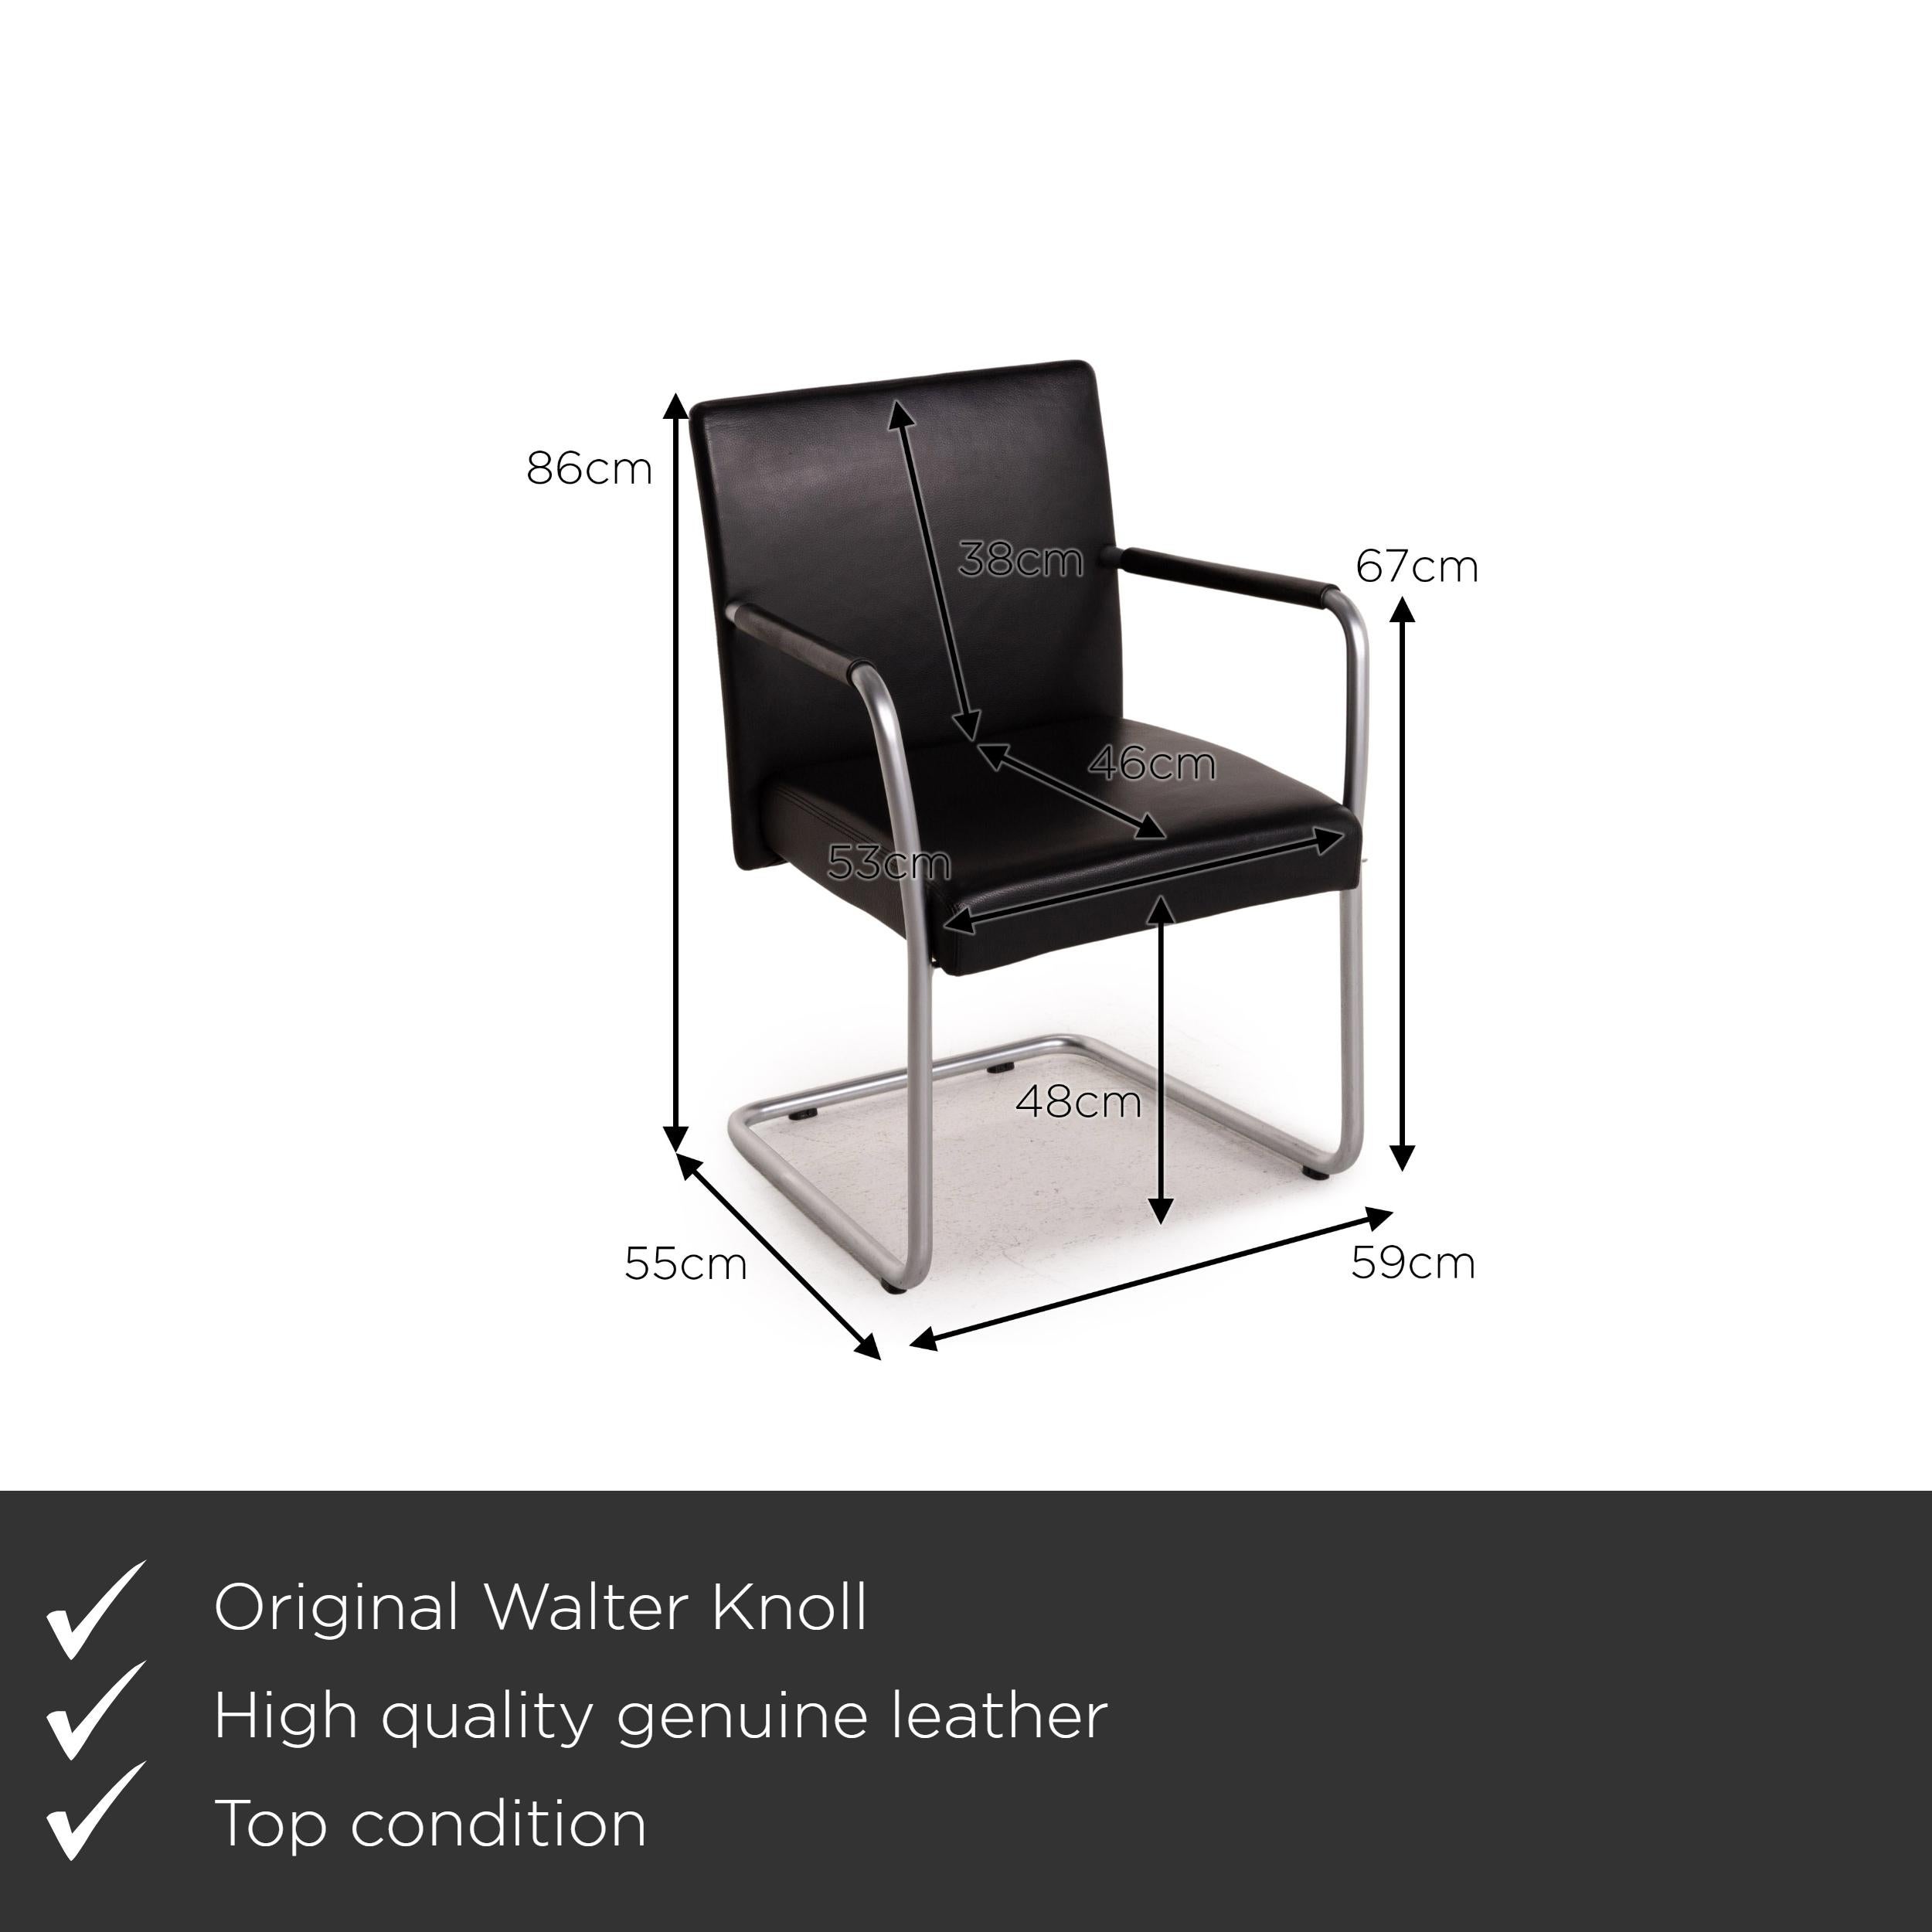 We present to you a Walter Knoll Jason 1519 leather chair black cantilever.

Product measurements in centimeters:

depth: 55
width: 59
height: 86
seat height: 48
rest height: 67
seat depth: 46
seat width: 53
back height: 38.

 
 